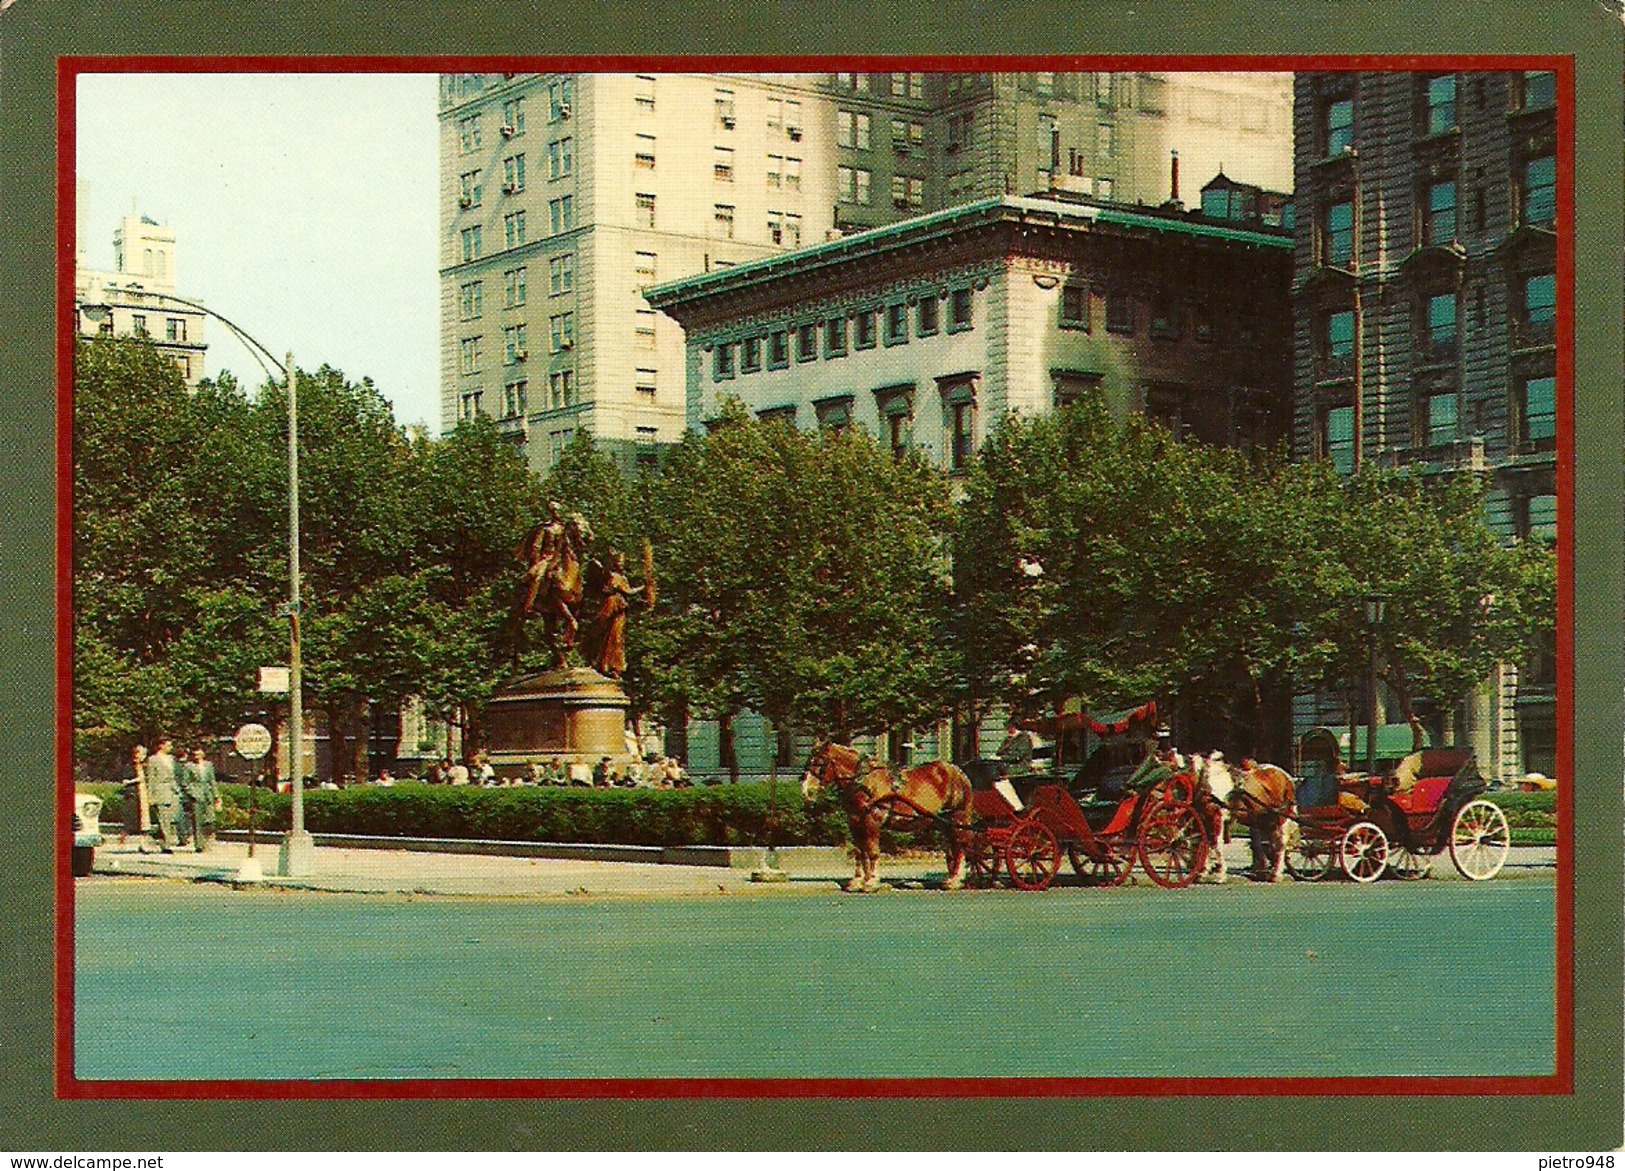 New York City (N.Y., USA) Hansom Cabs In Central Park Plaza And Statue Of General Sherman - Central Park